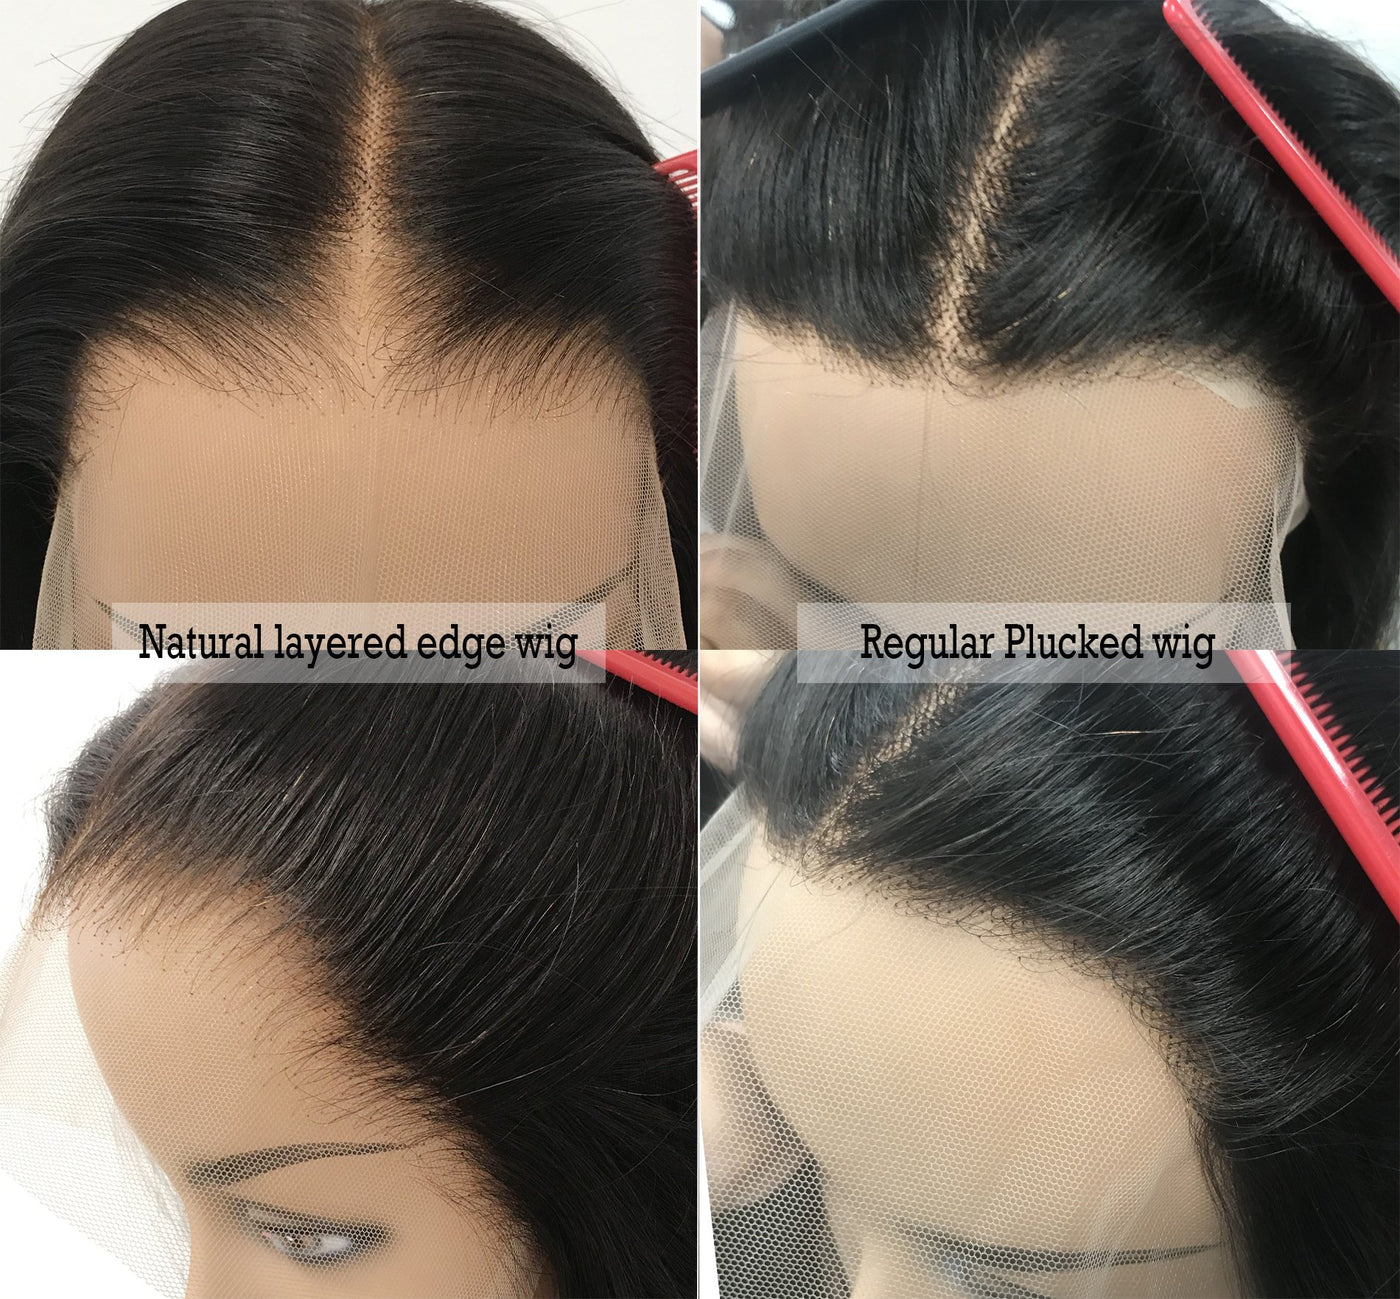 *NEW* CLEAR LACE & CLEAN HAIRLINE Straight BoB 13x6 Front Lace Human Hair Wig [BOB34]